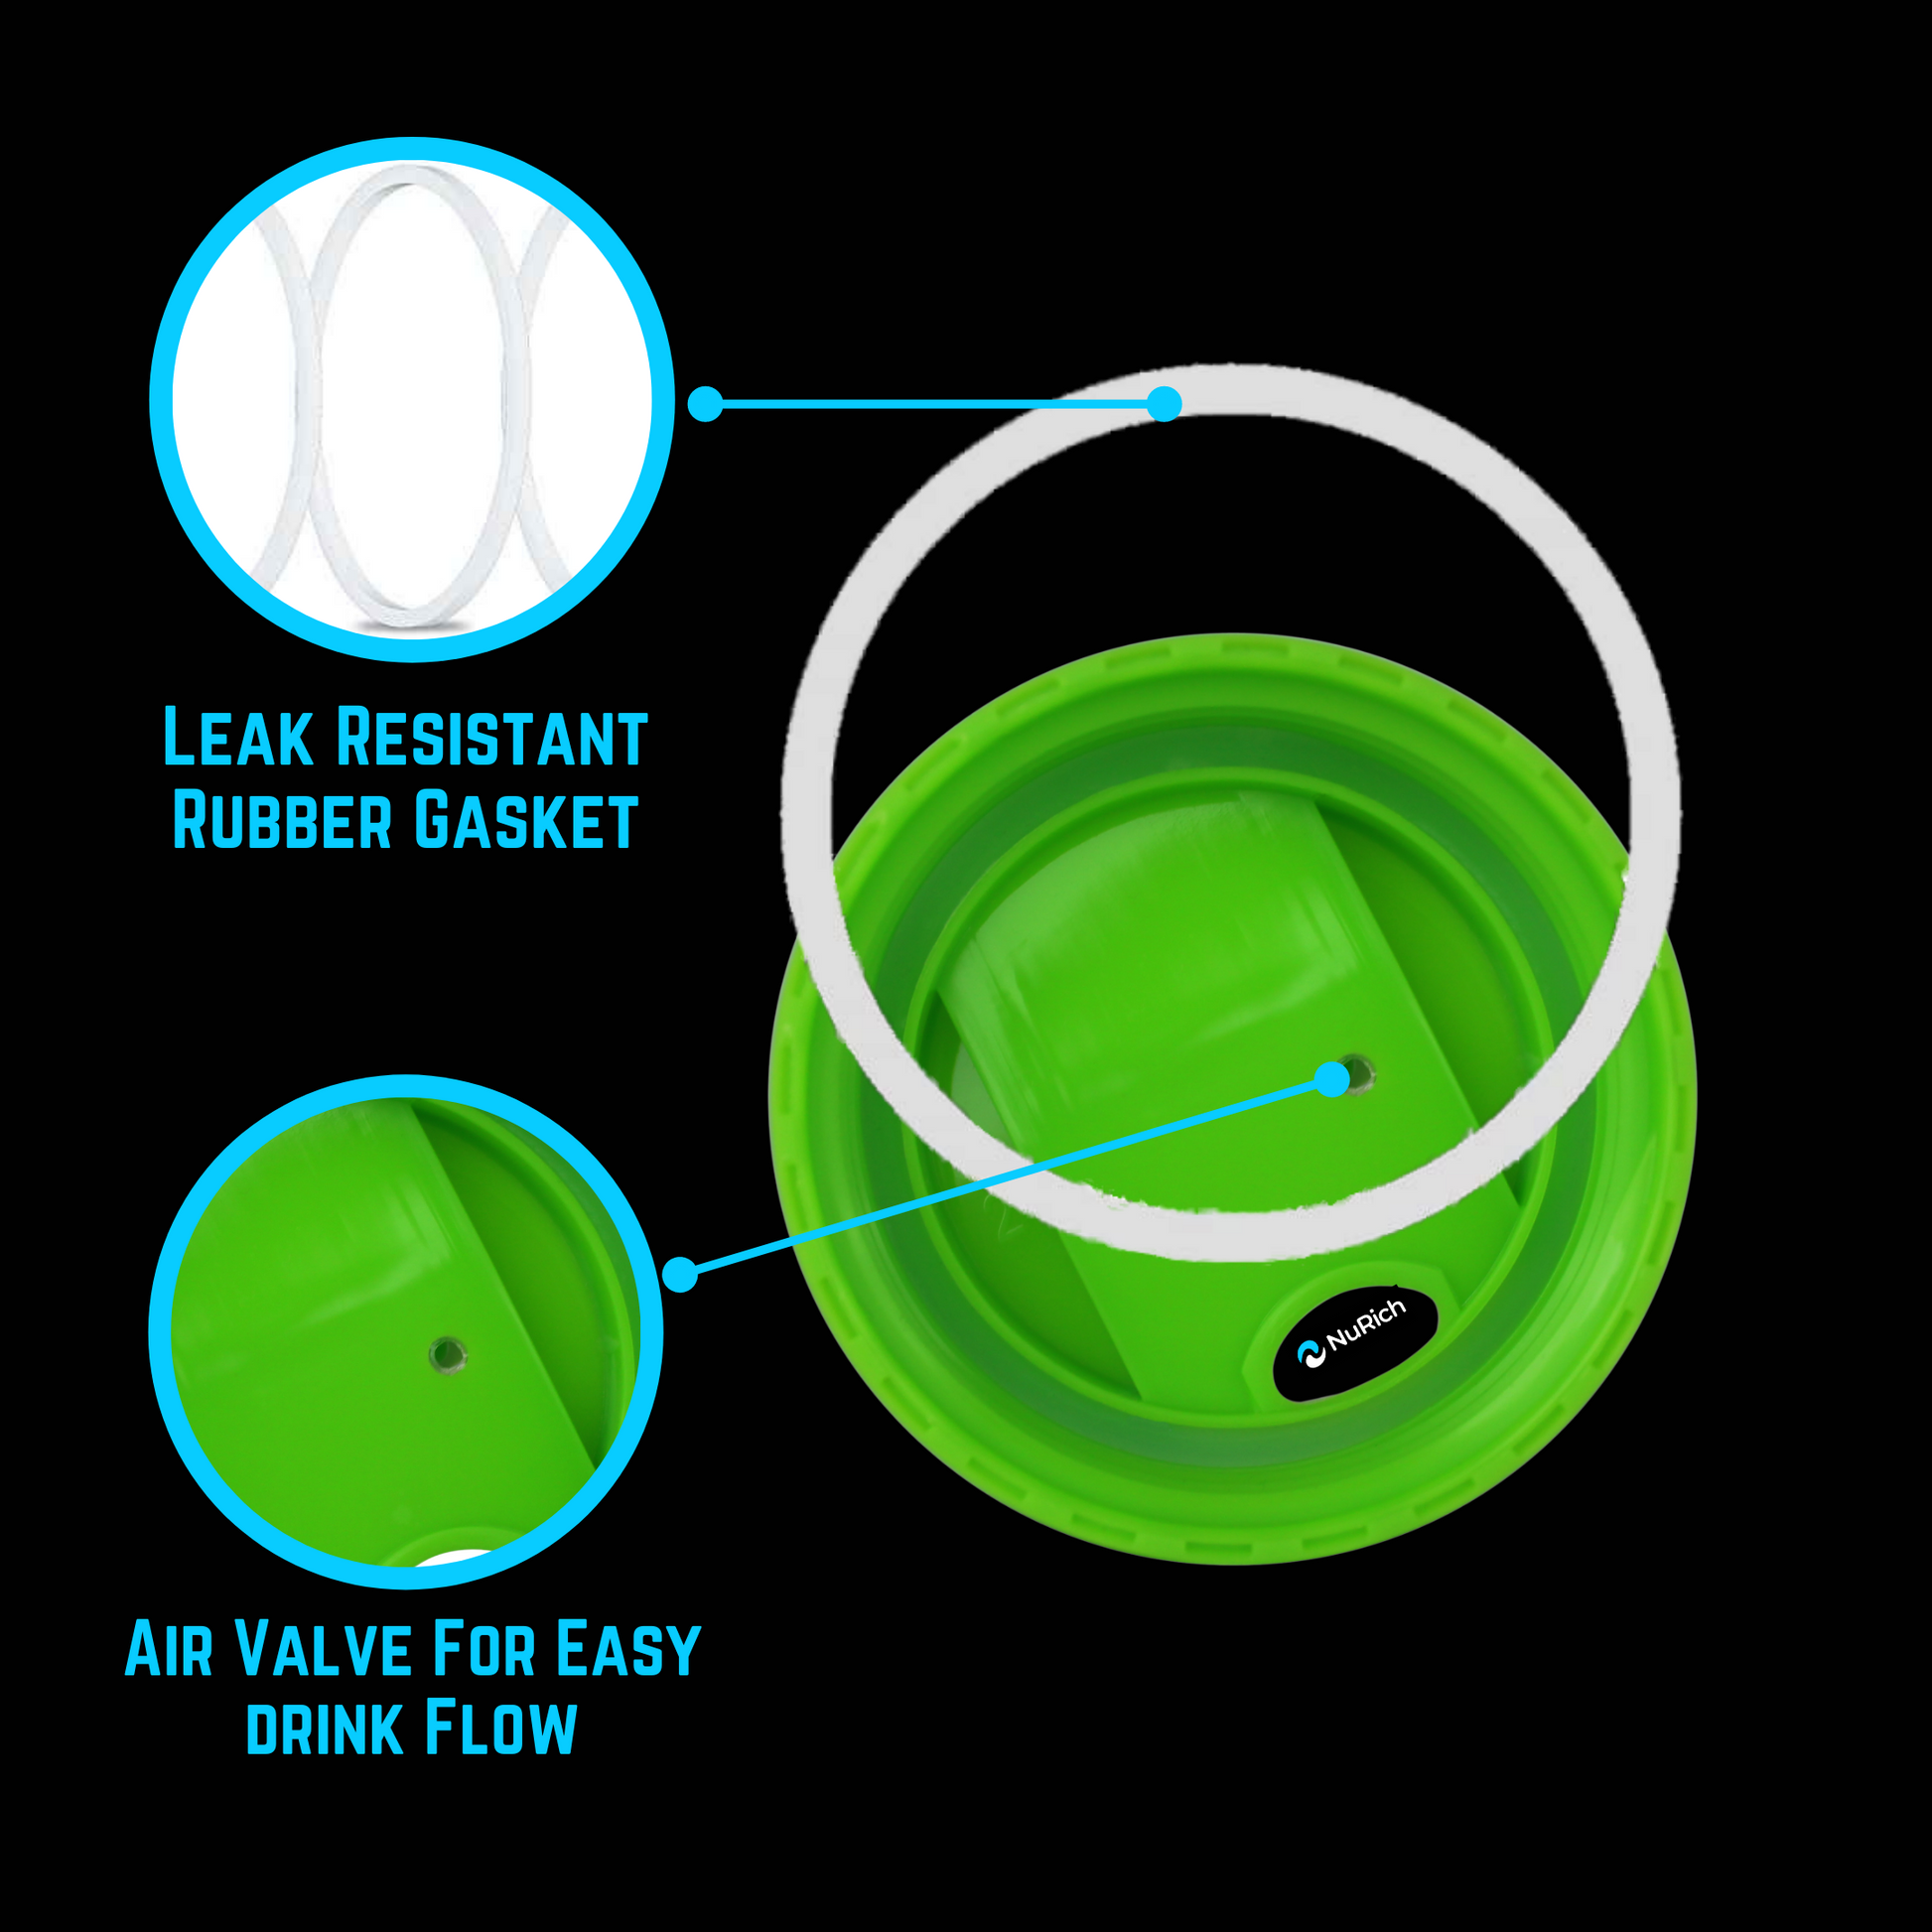 Nurich Green Hydro Wide Mouth Flip and Sip Replacement Coffee Lid or Cap Accessories Compatible with Hydroflask, Nalgene, and Many More Top Water